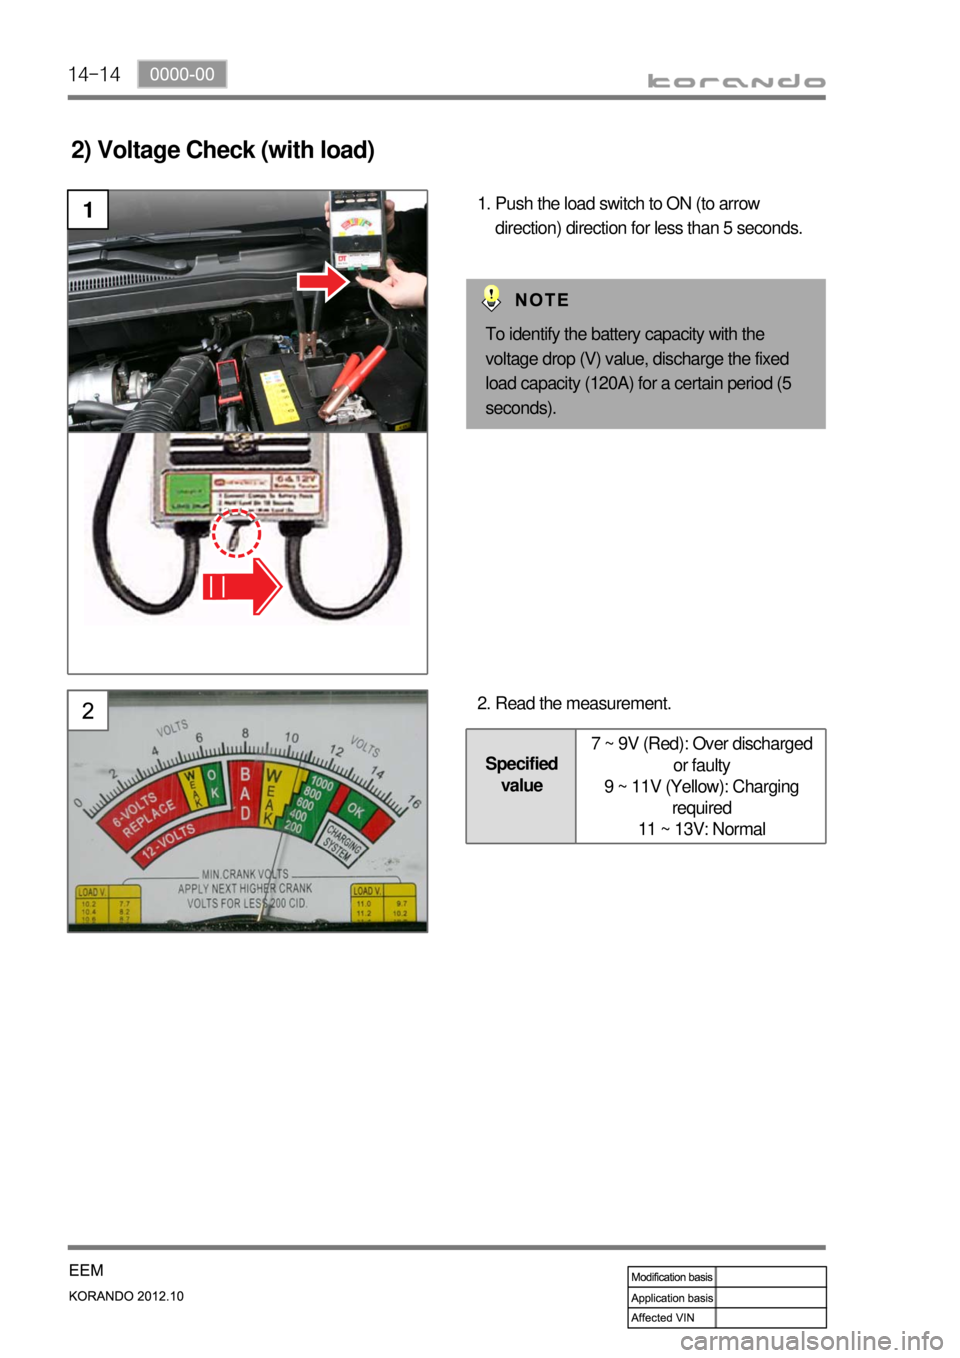 SSANGYONG KORANDO 2012  Service Manual 14-14
2) Voltage Check (with load)
1Push the load switch to ON (to arrow 
direction) direction for less than 5 seconds. 1.
Read the measurement. 2.
Specified 
value7 ~ 9V (Red): Over discharged 
or fa